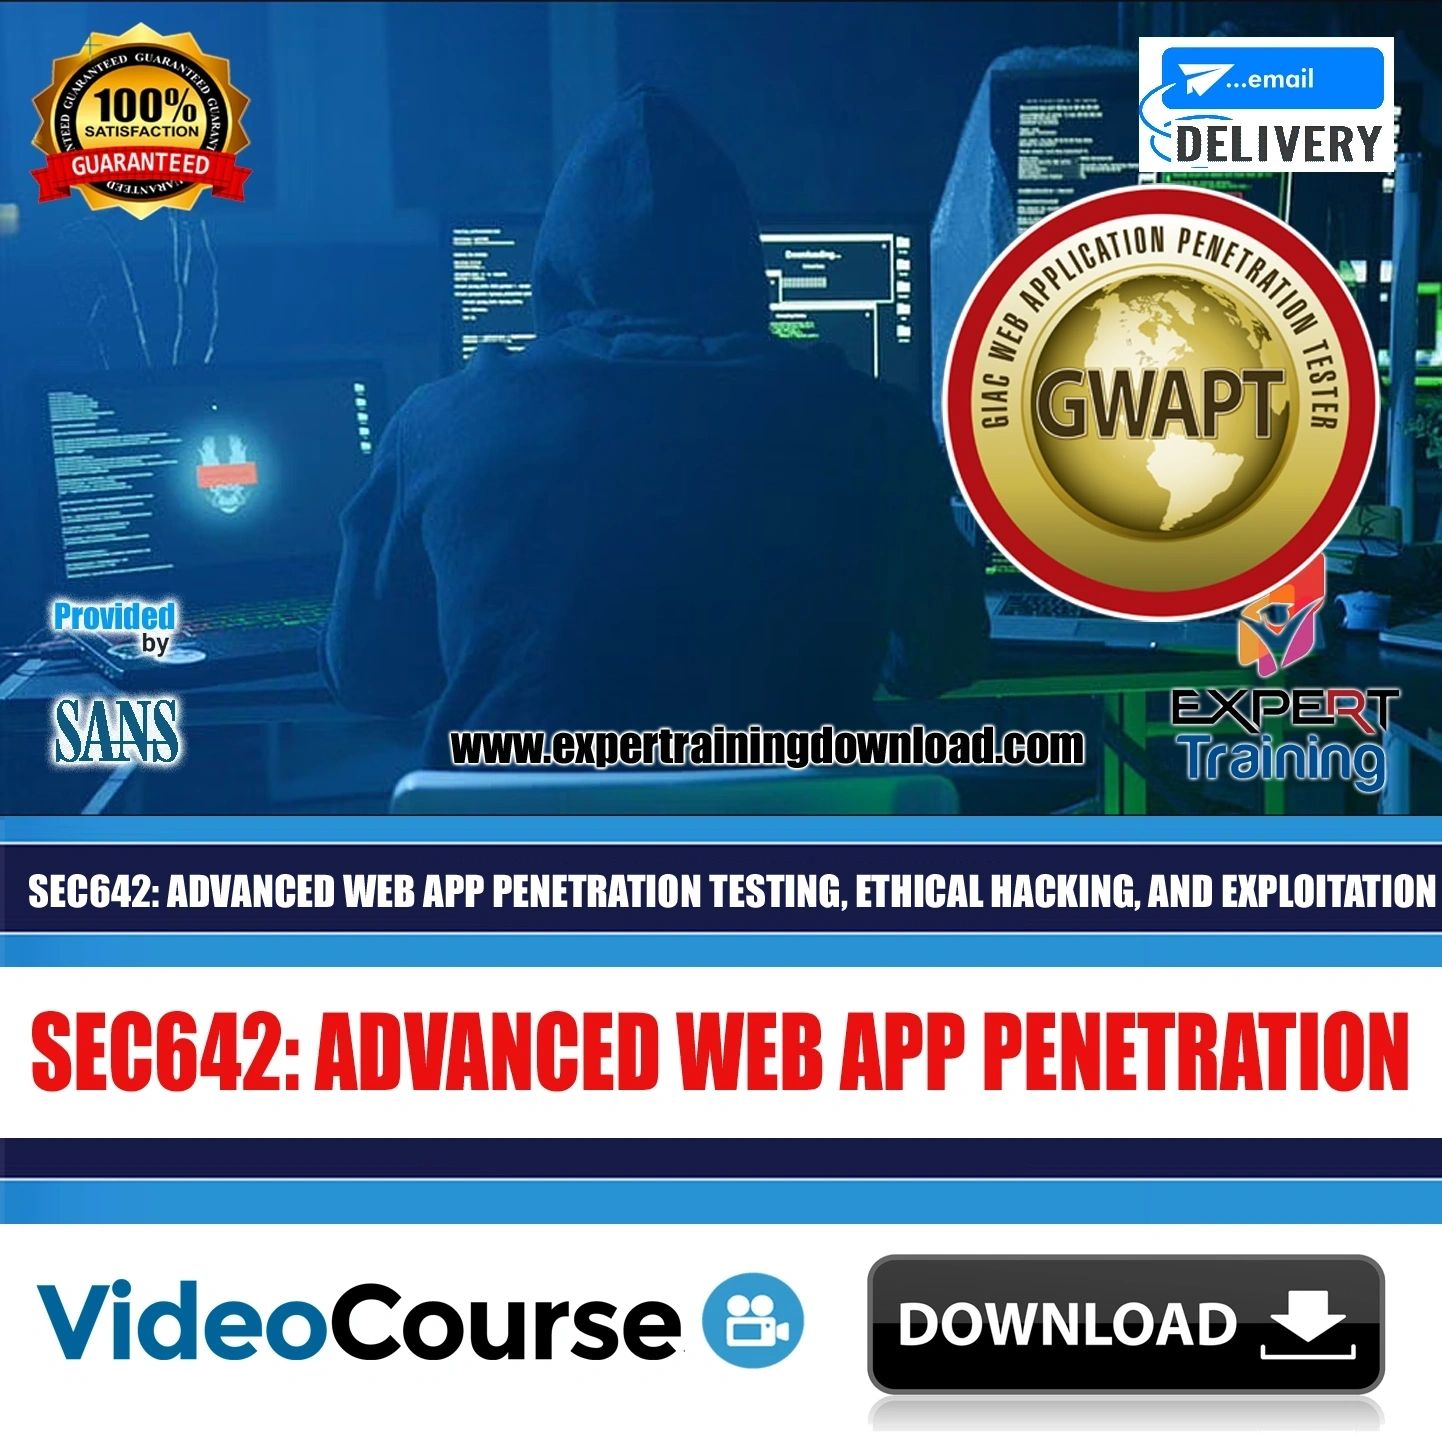 ADVANCED WEB APP PENETRATION TESTING, ETHICAL HACKING, AND EXPLOITATION TECHNIQUES Online Course